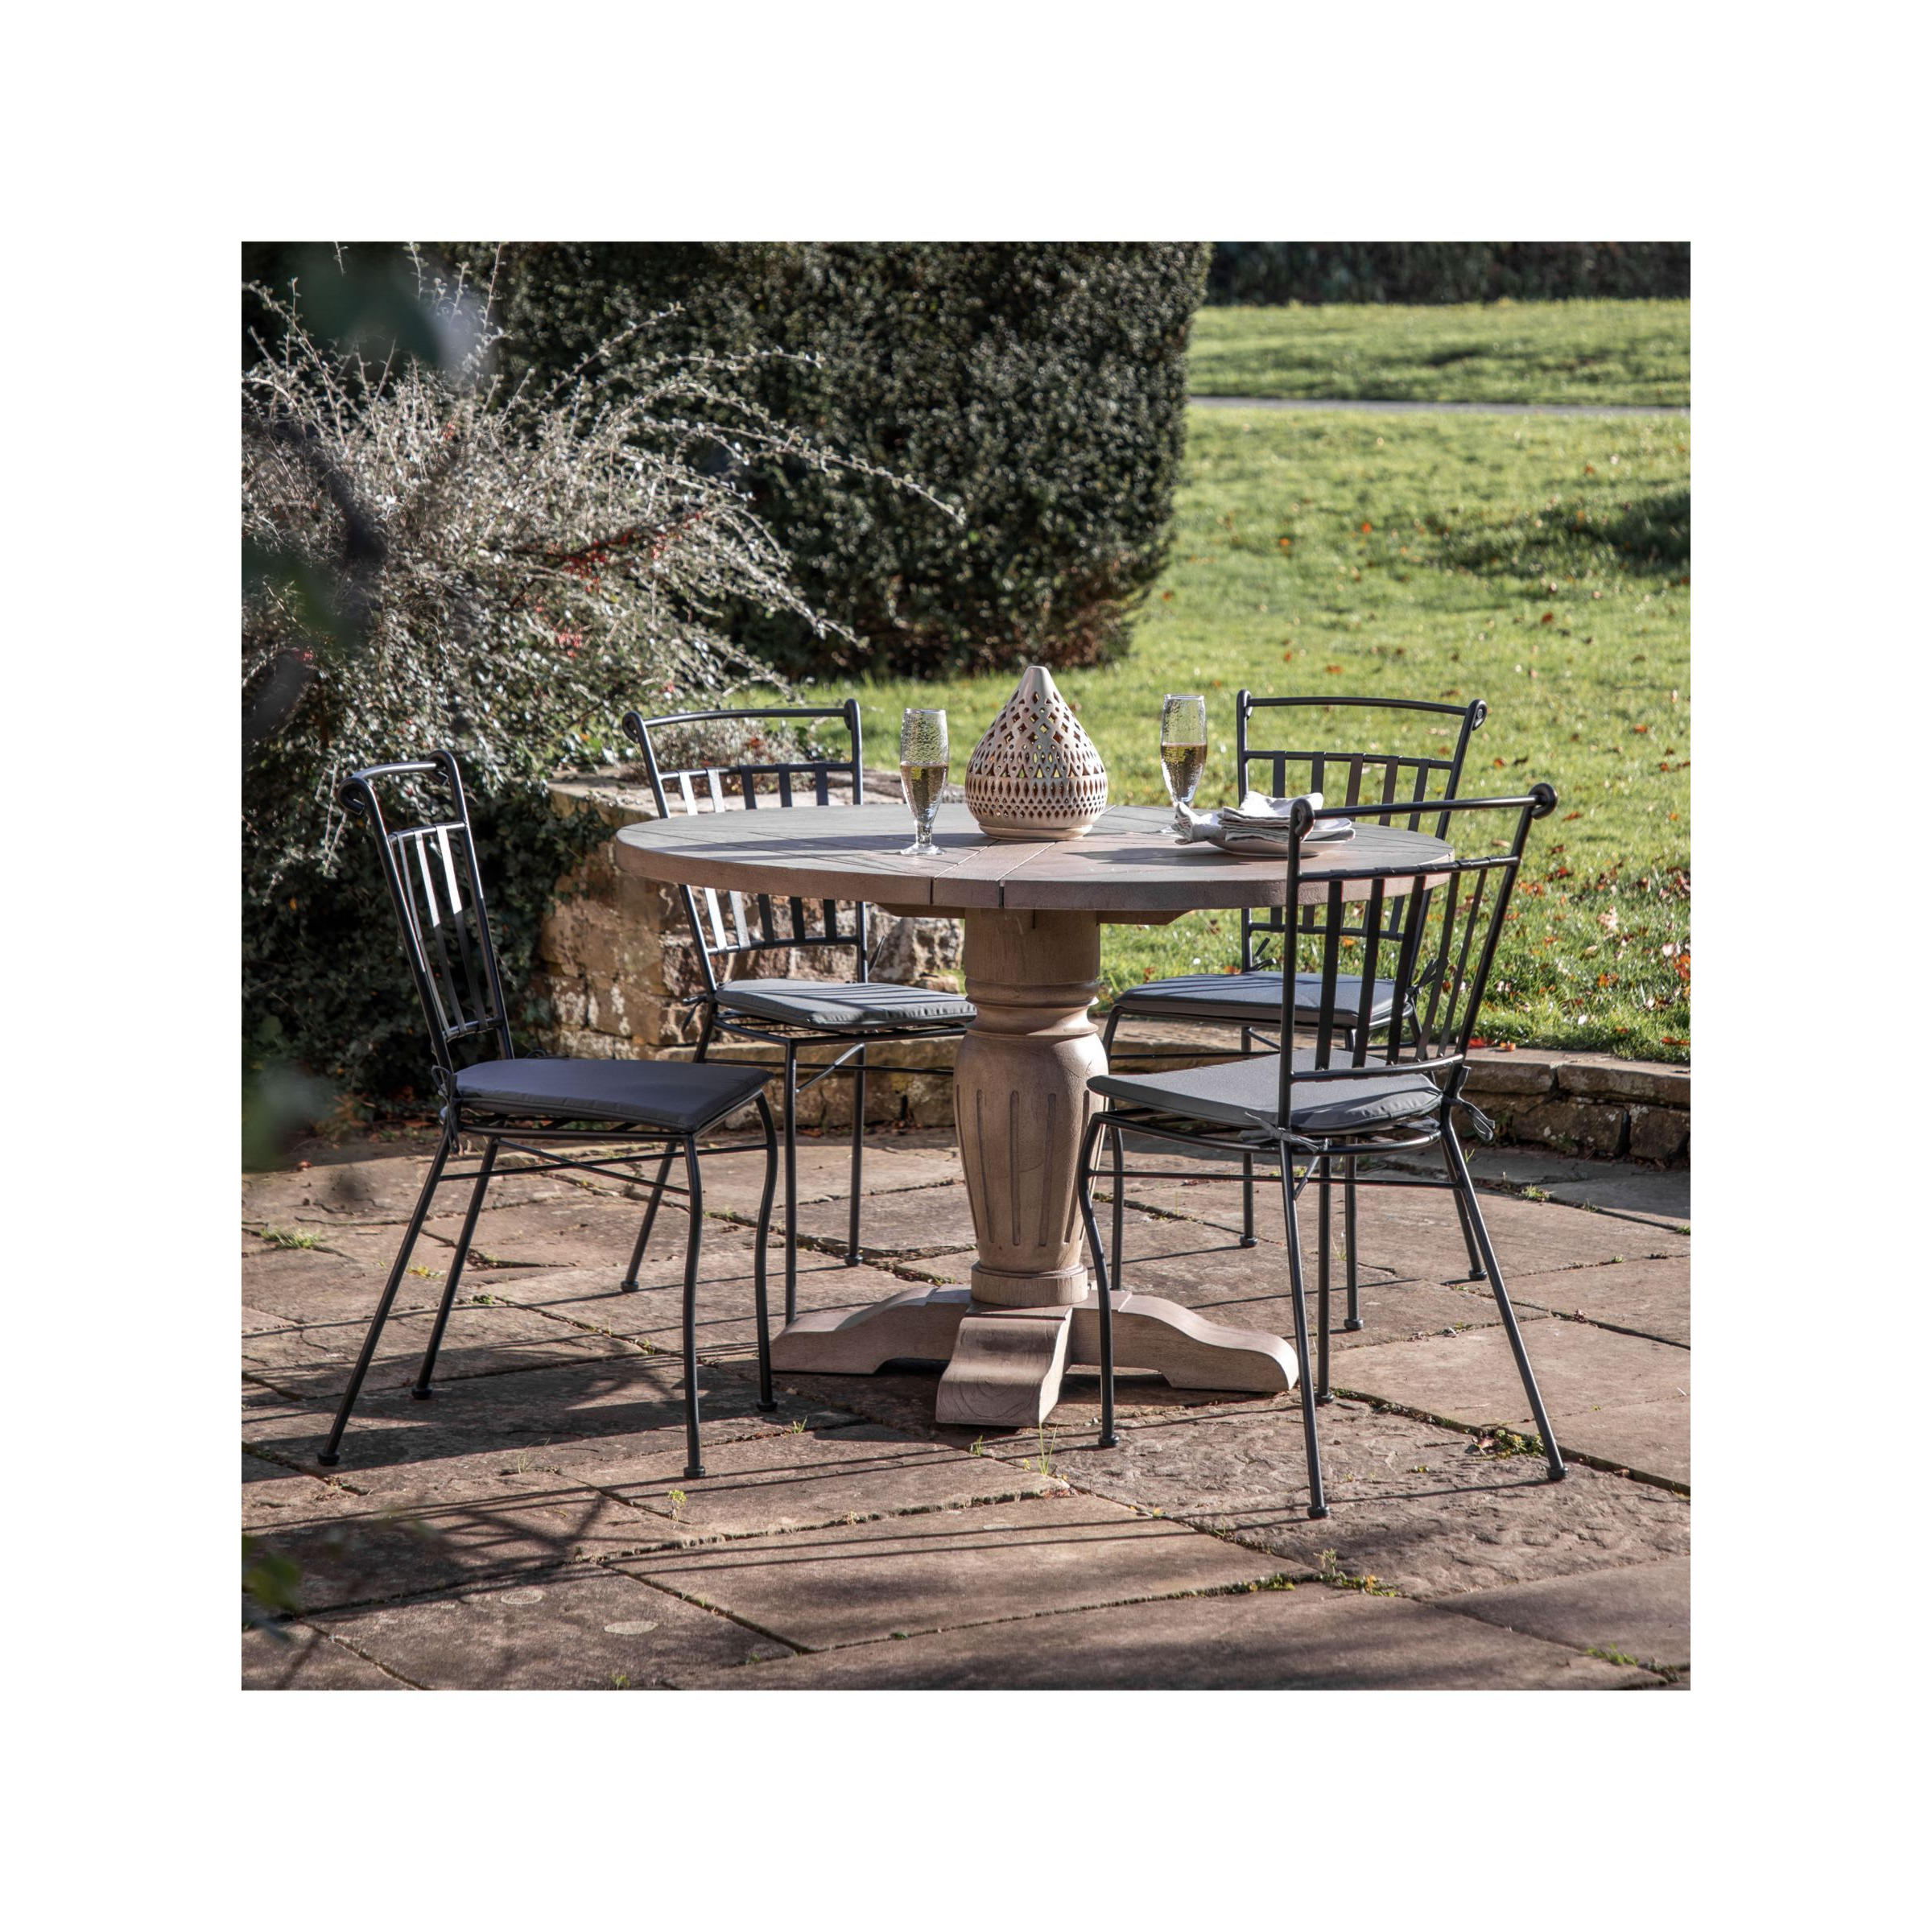 Gallery Direct Camillo 4-Seater Round Teak Wood Garden Dining Table, Natural - image 1